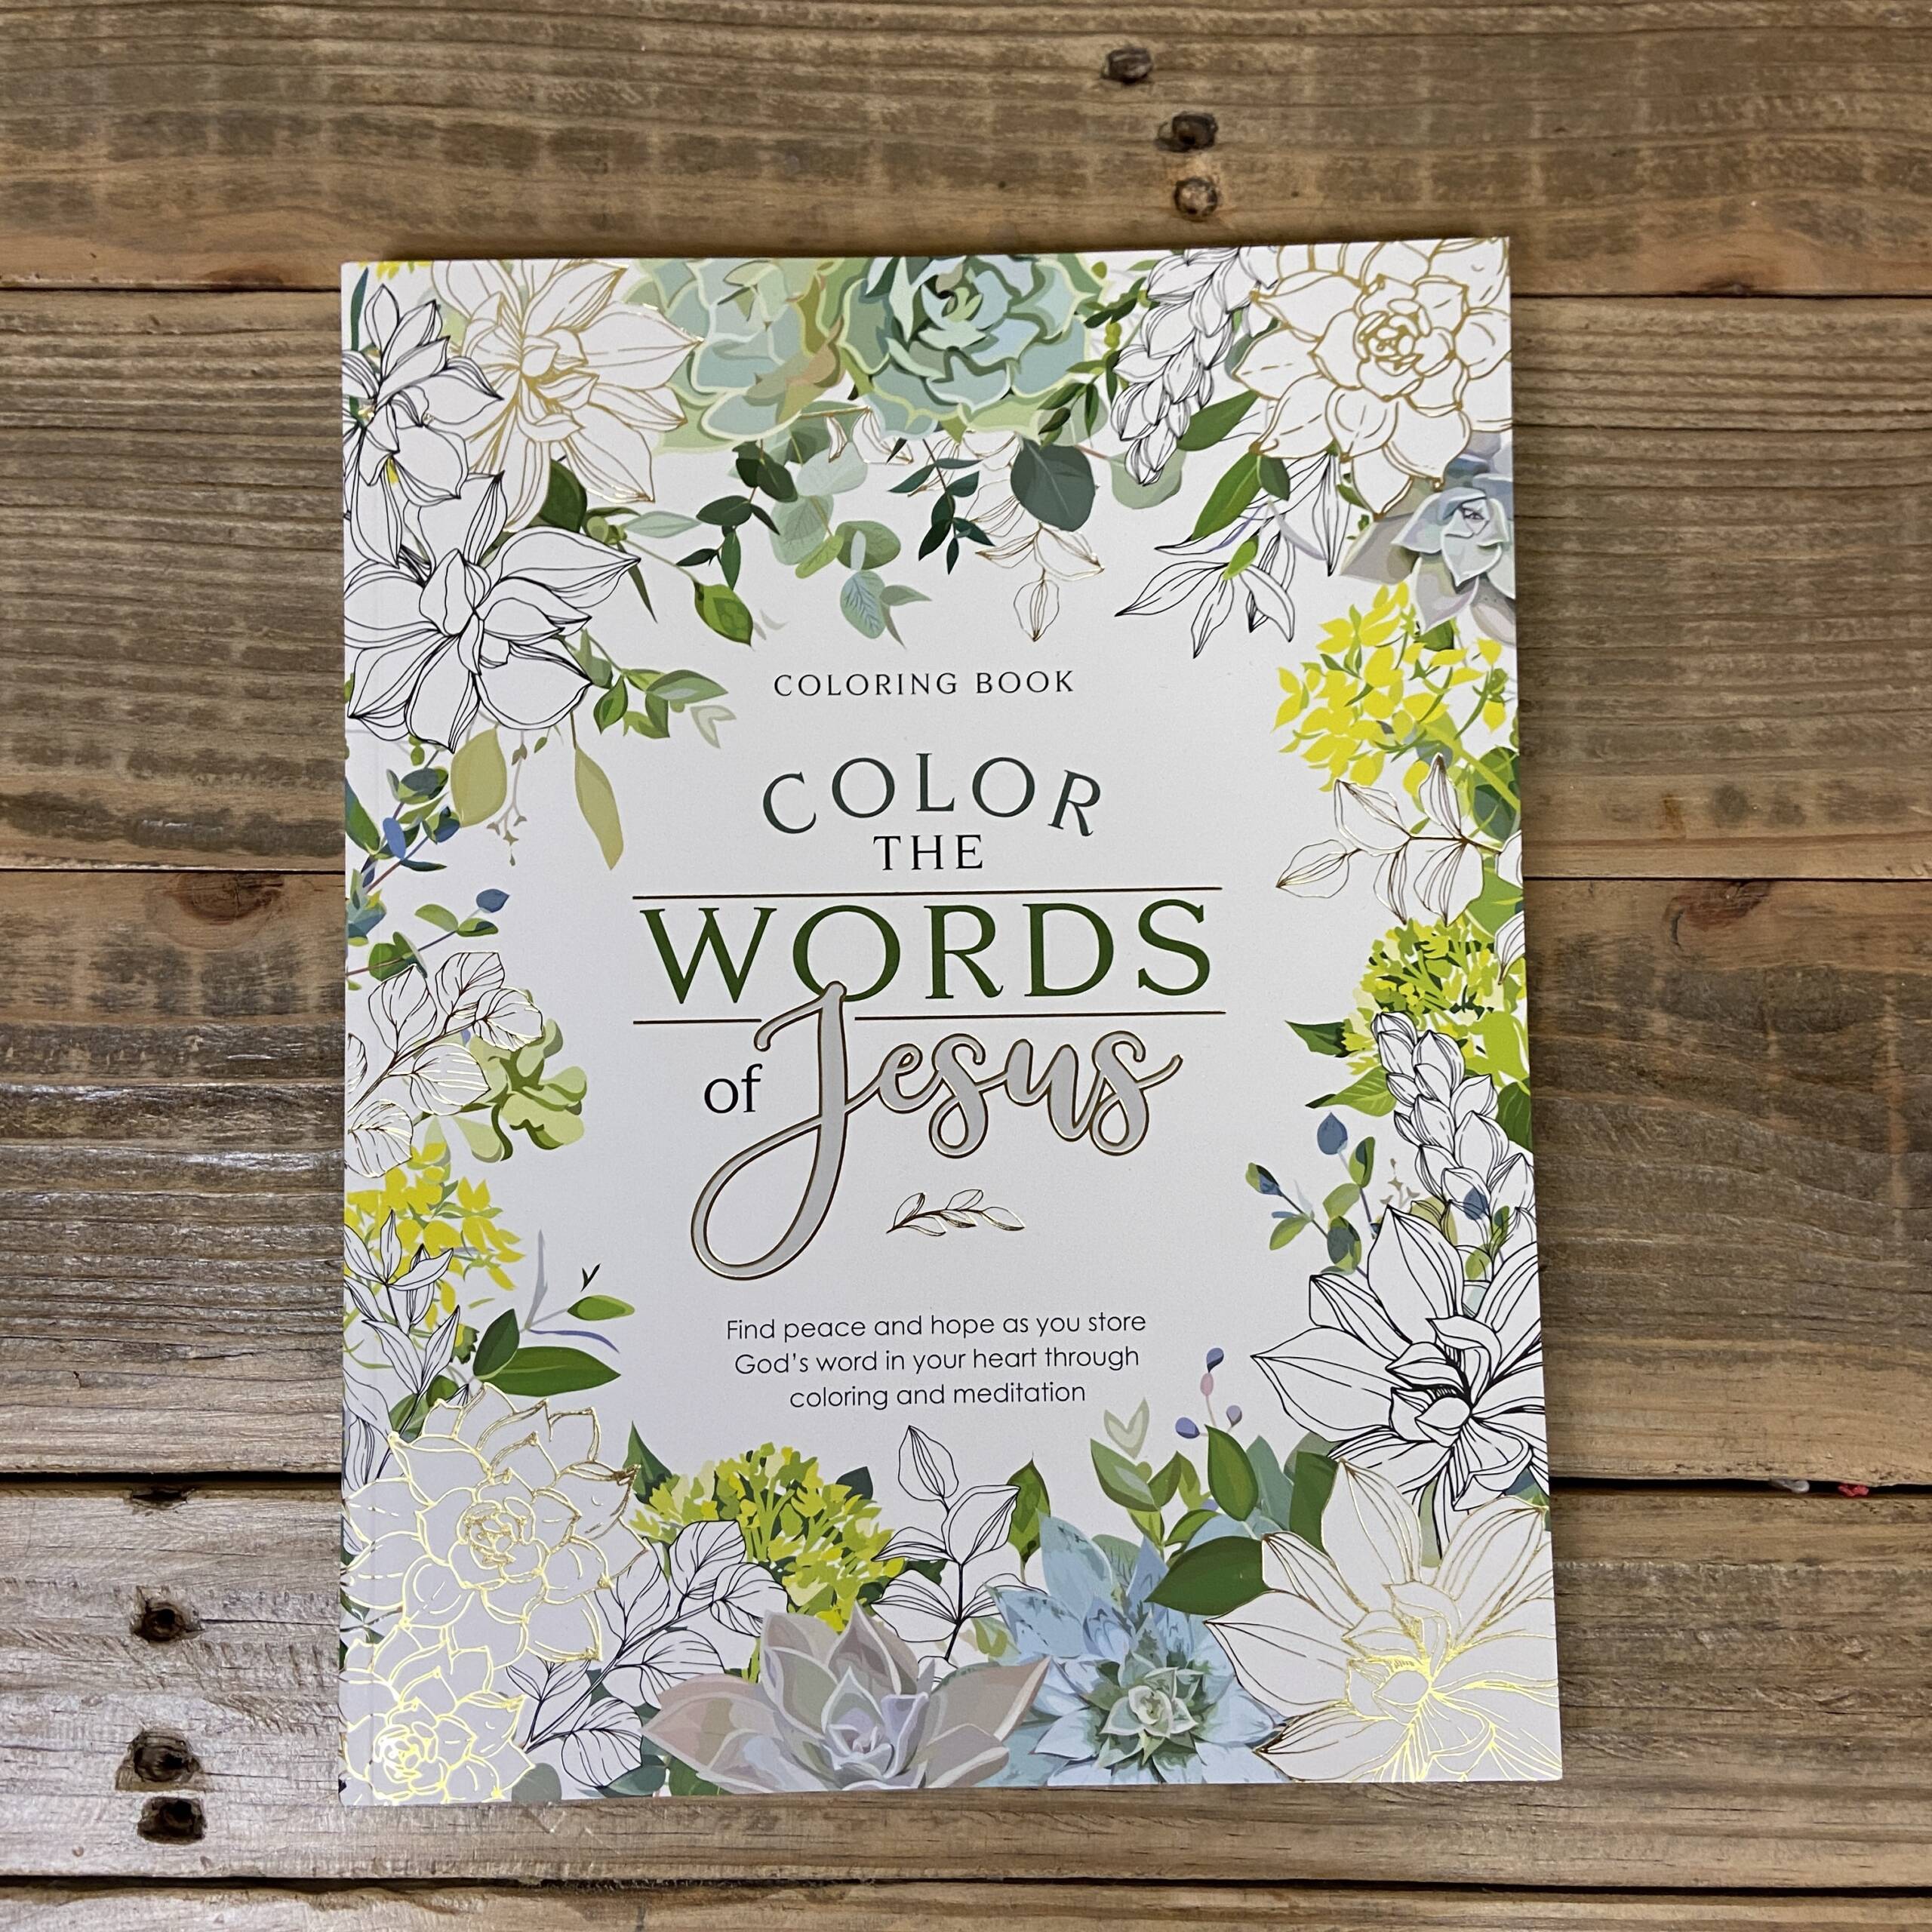 Color the Promises of God: An Adult Coloring Book for Your Soul